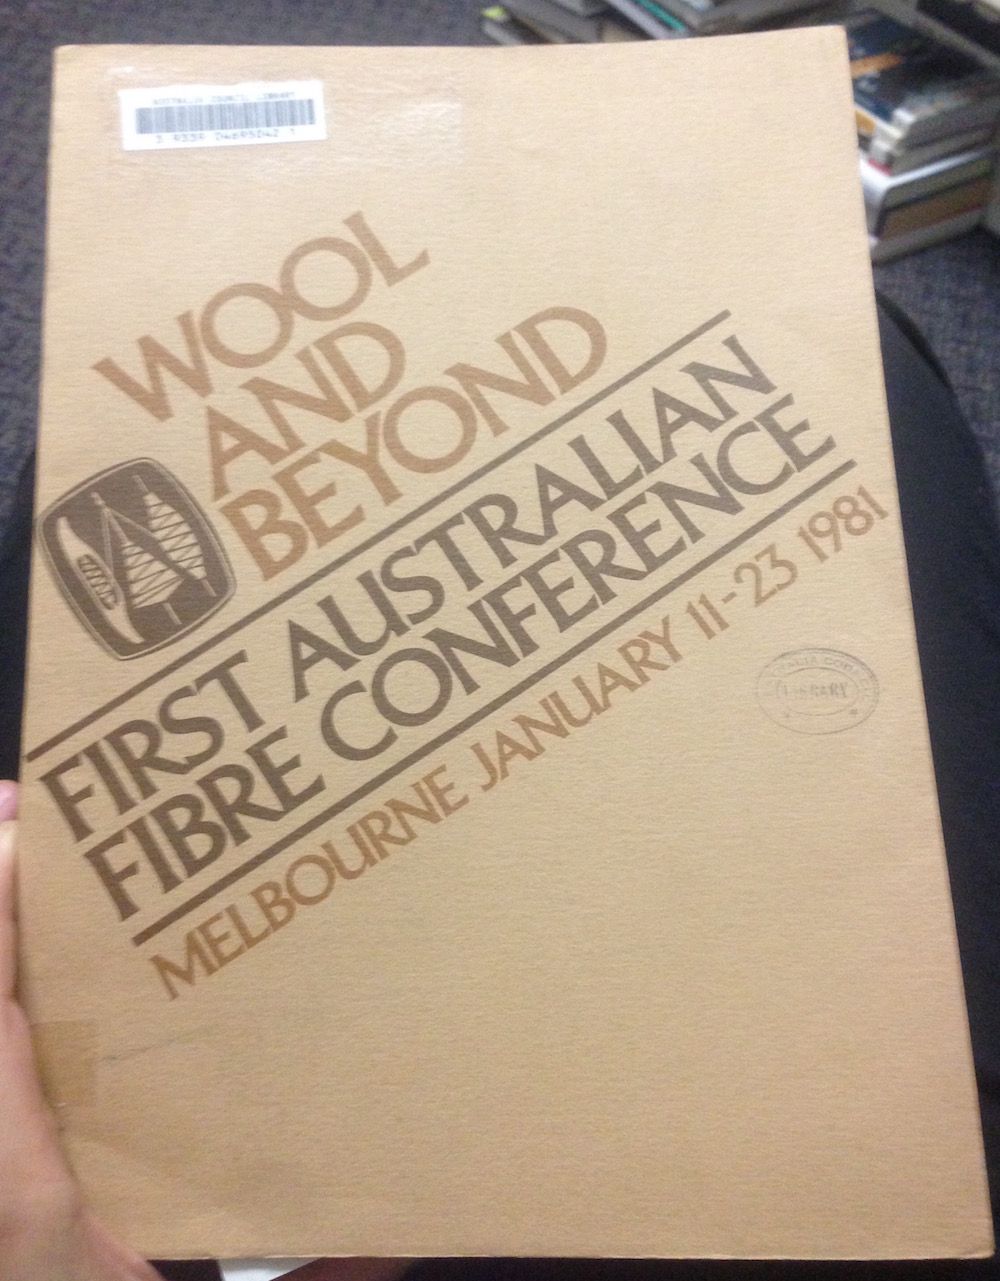 Photograph of the cover of Wool and Beyond: First Australian Fibre Conference: Melbourne January 11-23 1981 (1982)